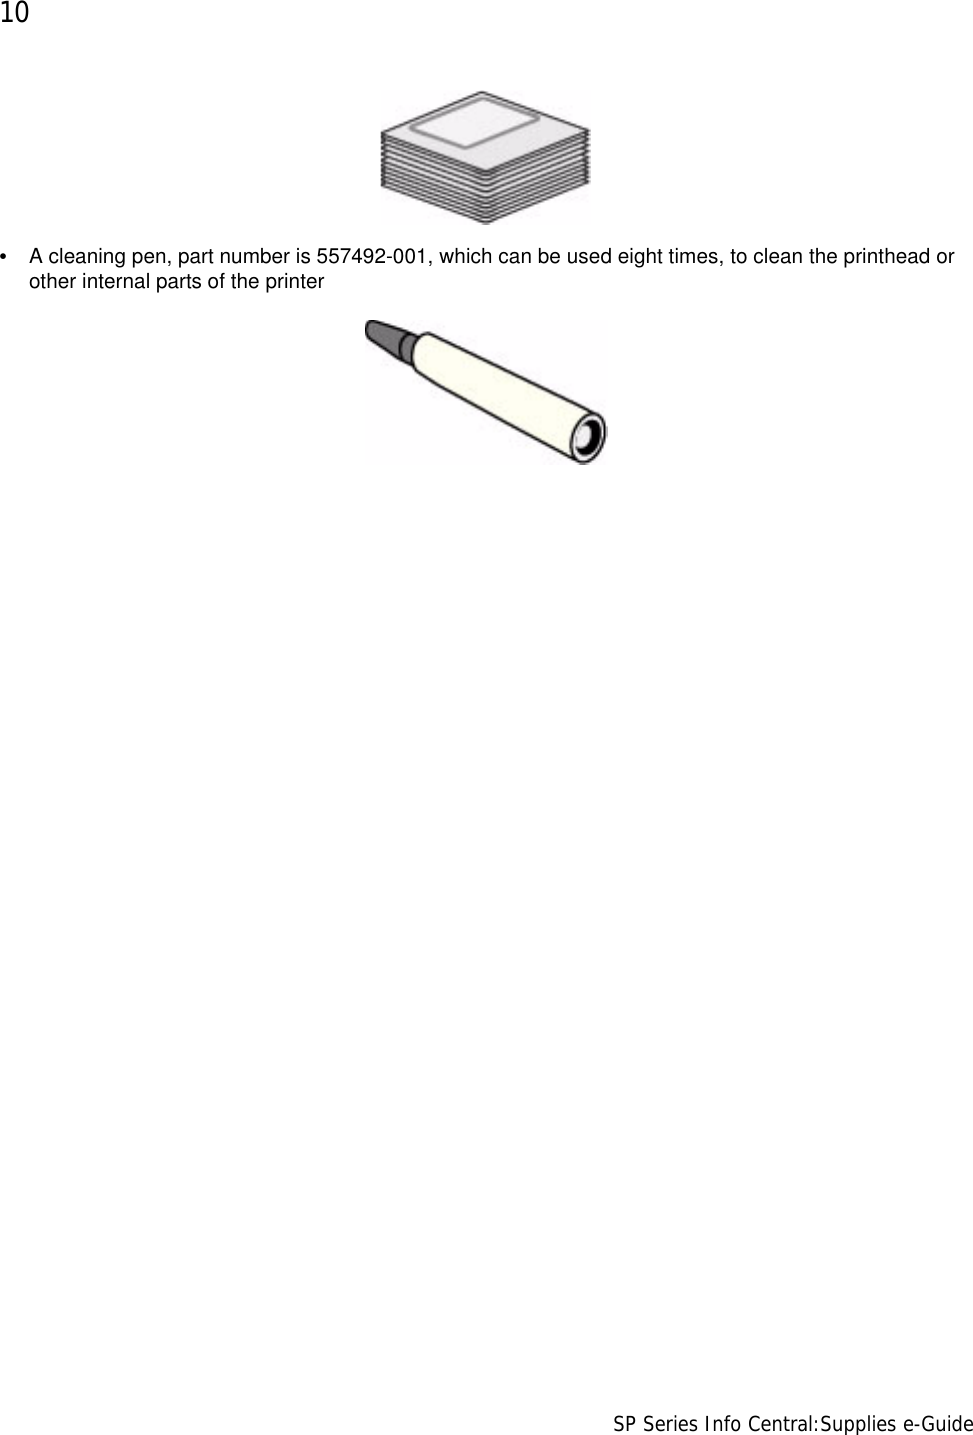 10                      SP Series Info Central:Supplies e-Guide•A cleaning pen, part number is 557492-001, which can be used eight times, to clean the printhead or other internal parts of the printer